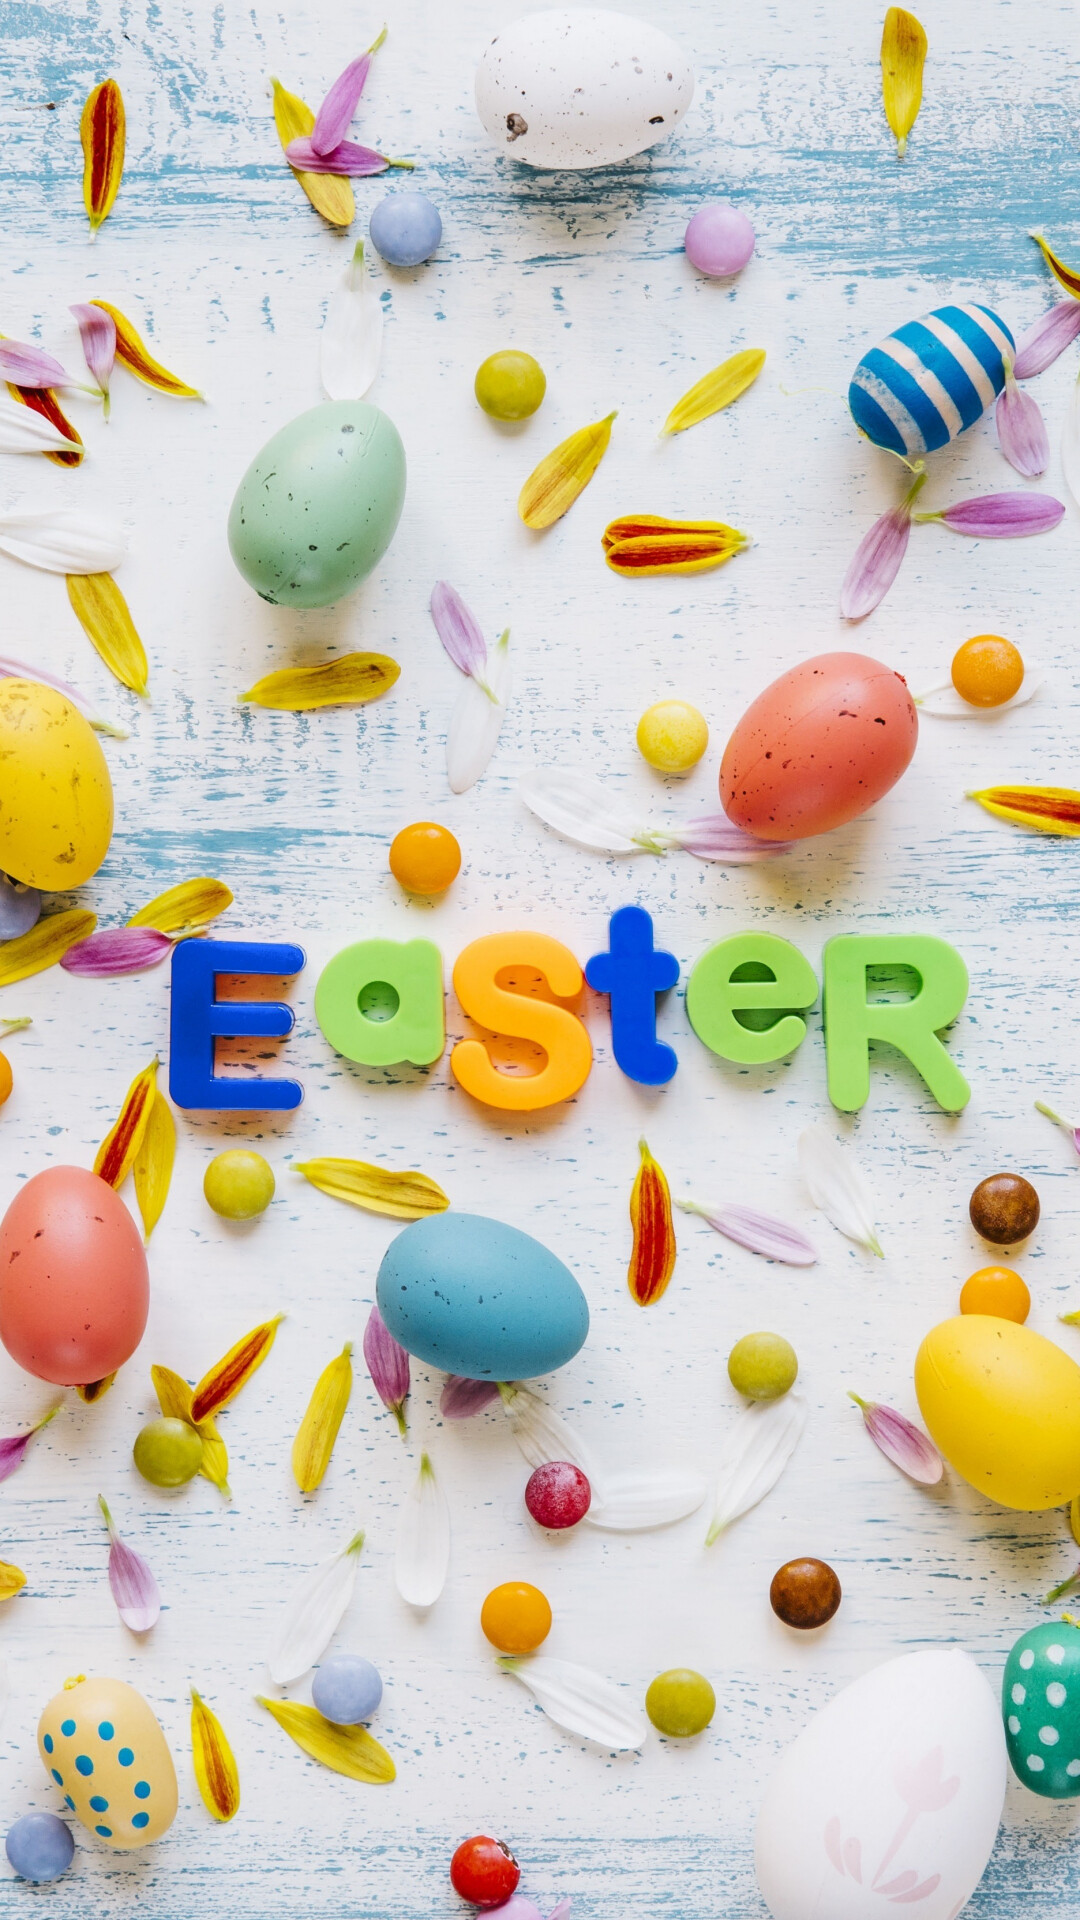 Easter: Colorful eggs, The joyful end to the Lenten season of fasting and penitence. 1080x1920 Full HD Background.